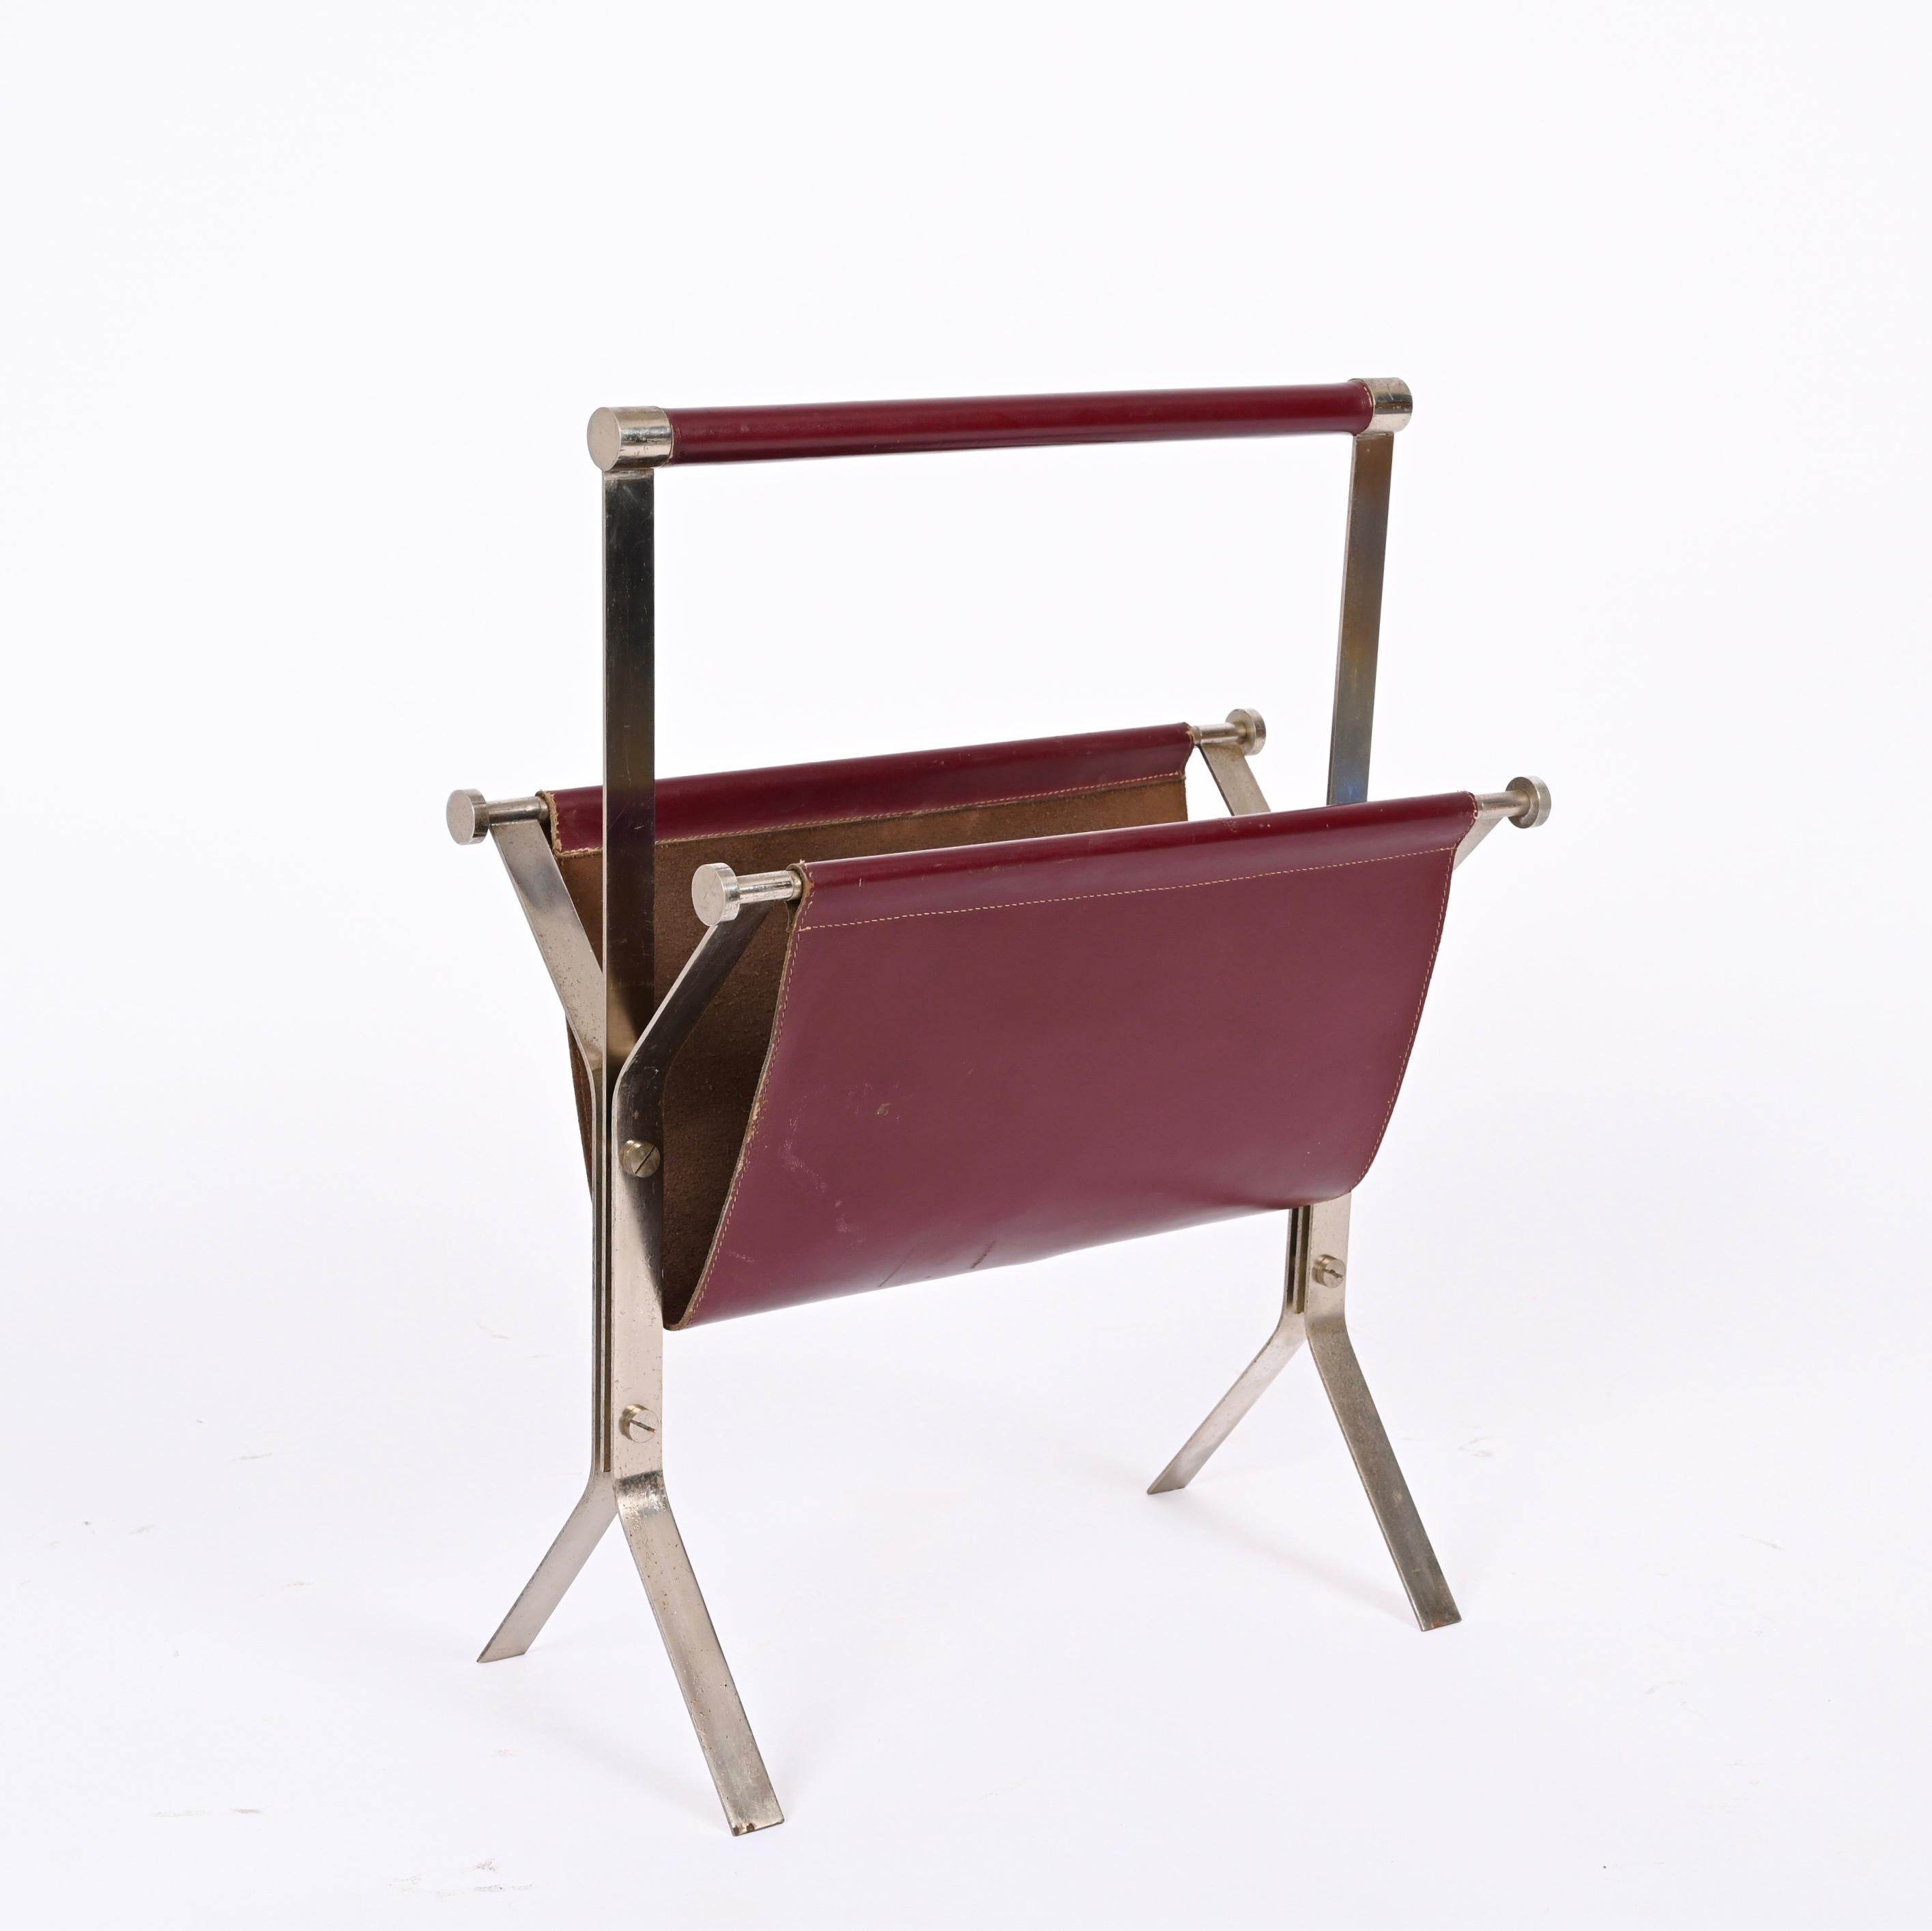 Late 20th Century Alessandro Albrizzi Midcentury Chromed Steel and Red Leather Magazine Rack 1970s For Sale